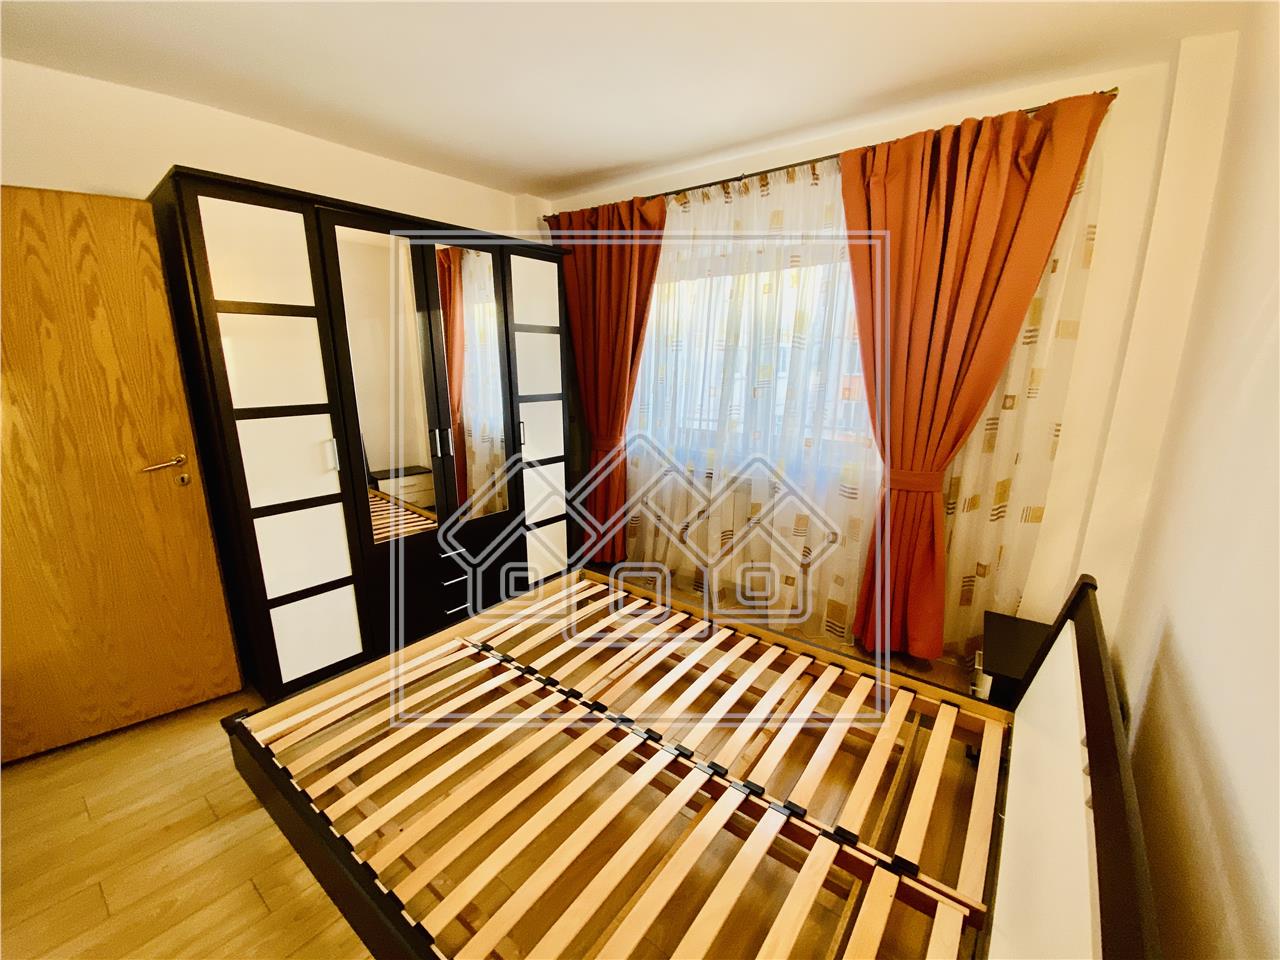 Apartment for sale in Siviu - 2 rooms and balcony - M. Viteazu area